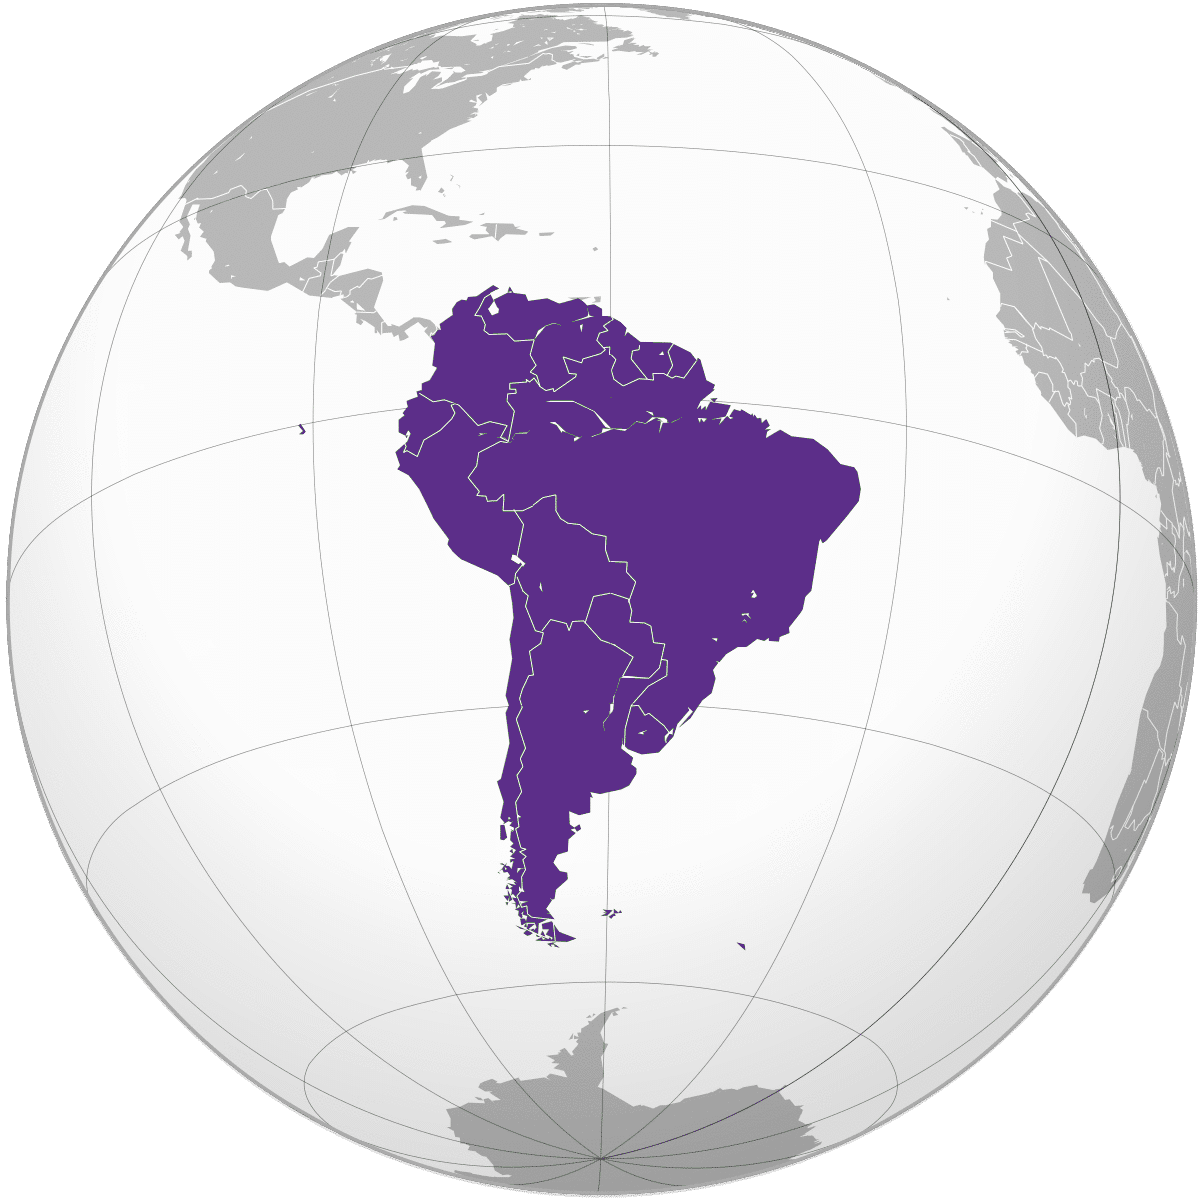 International Moving to South America